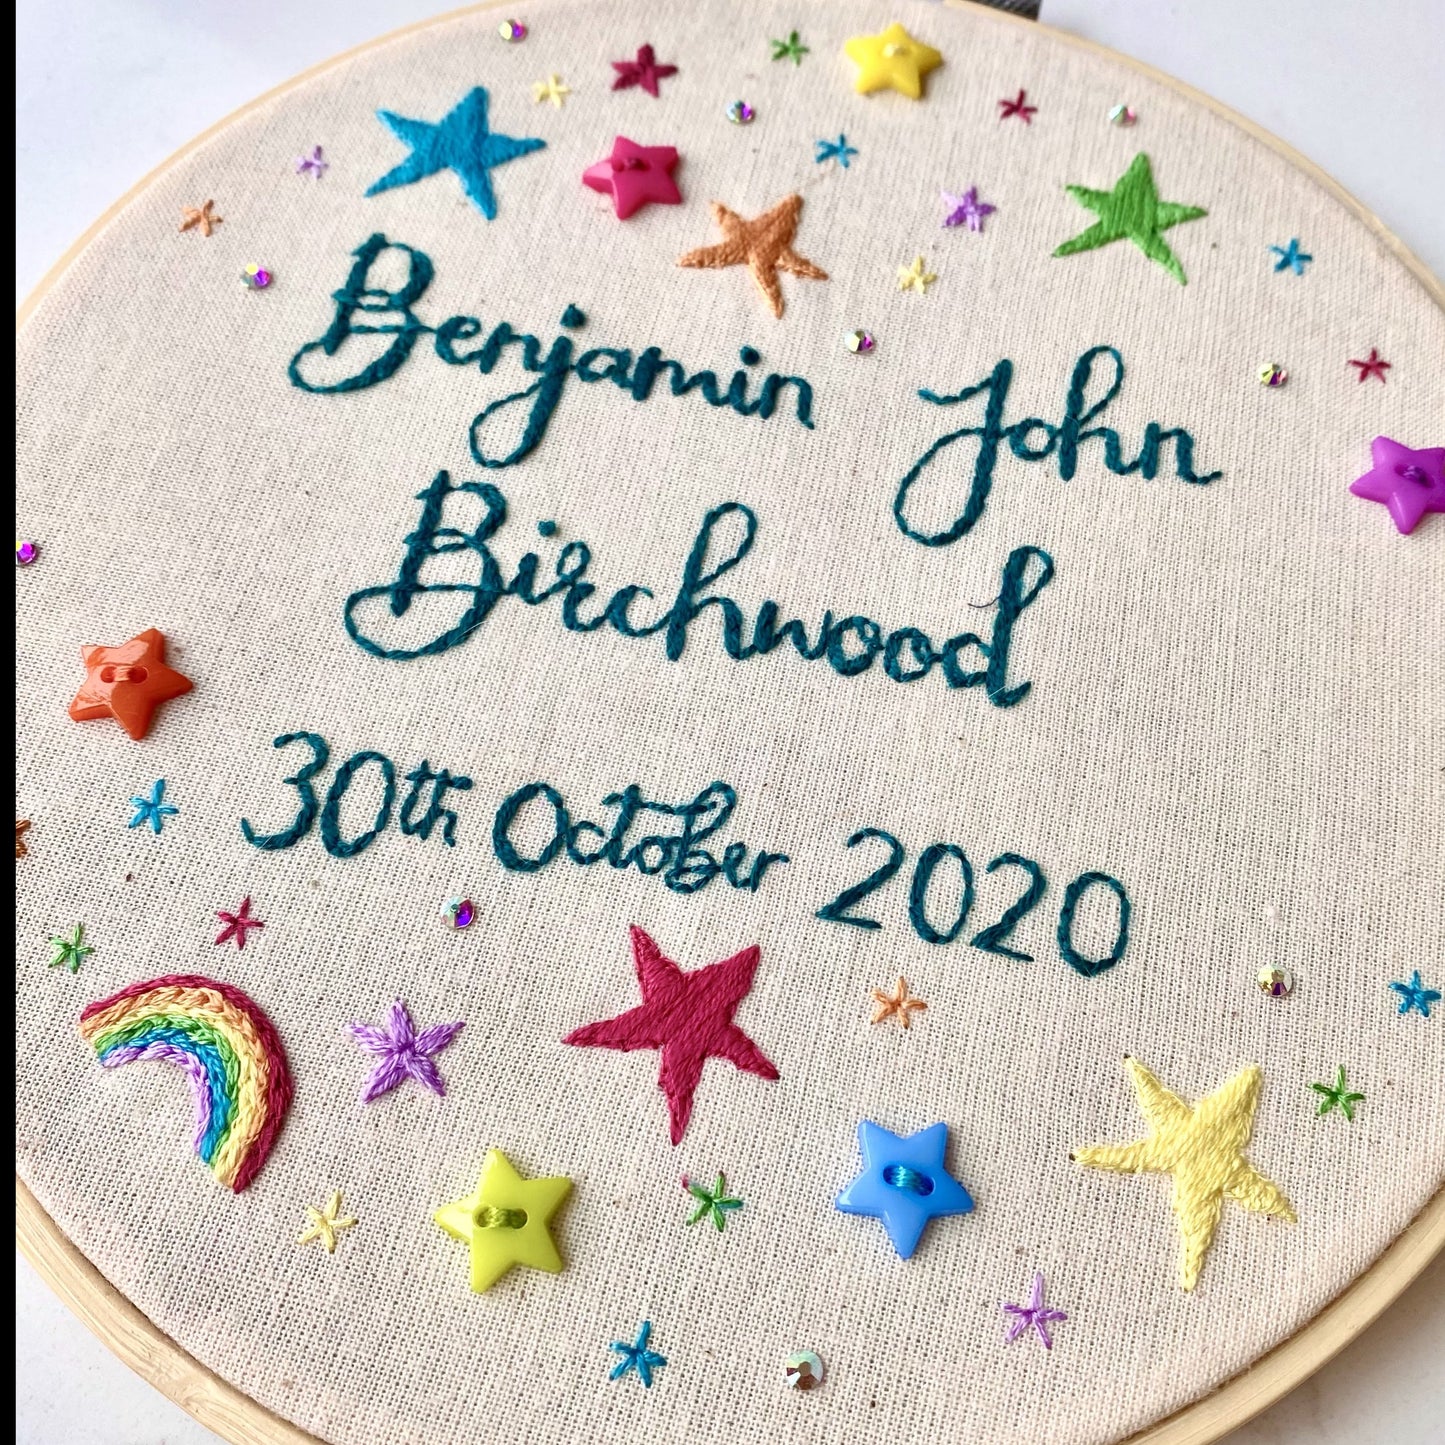 Name & date embroidery hoop